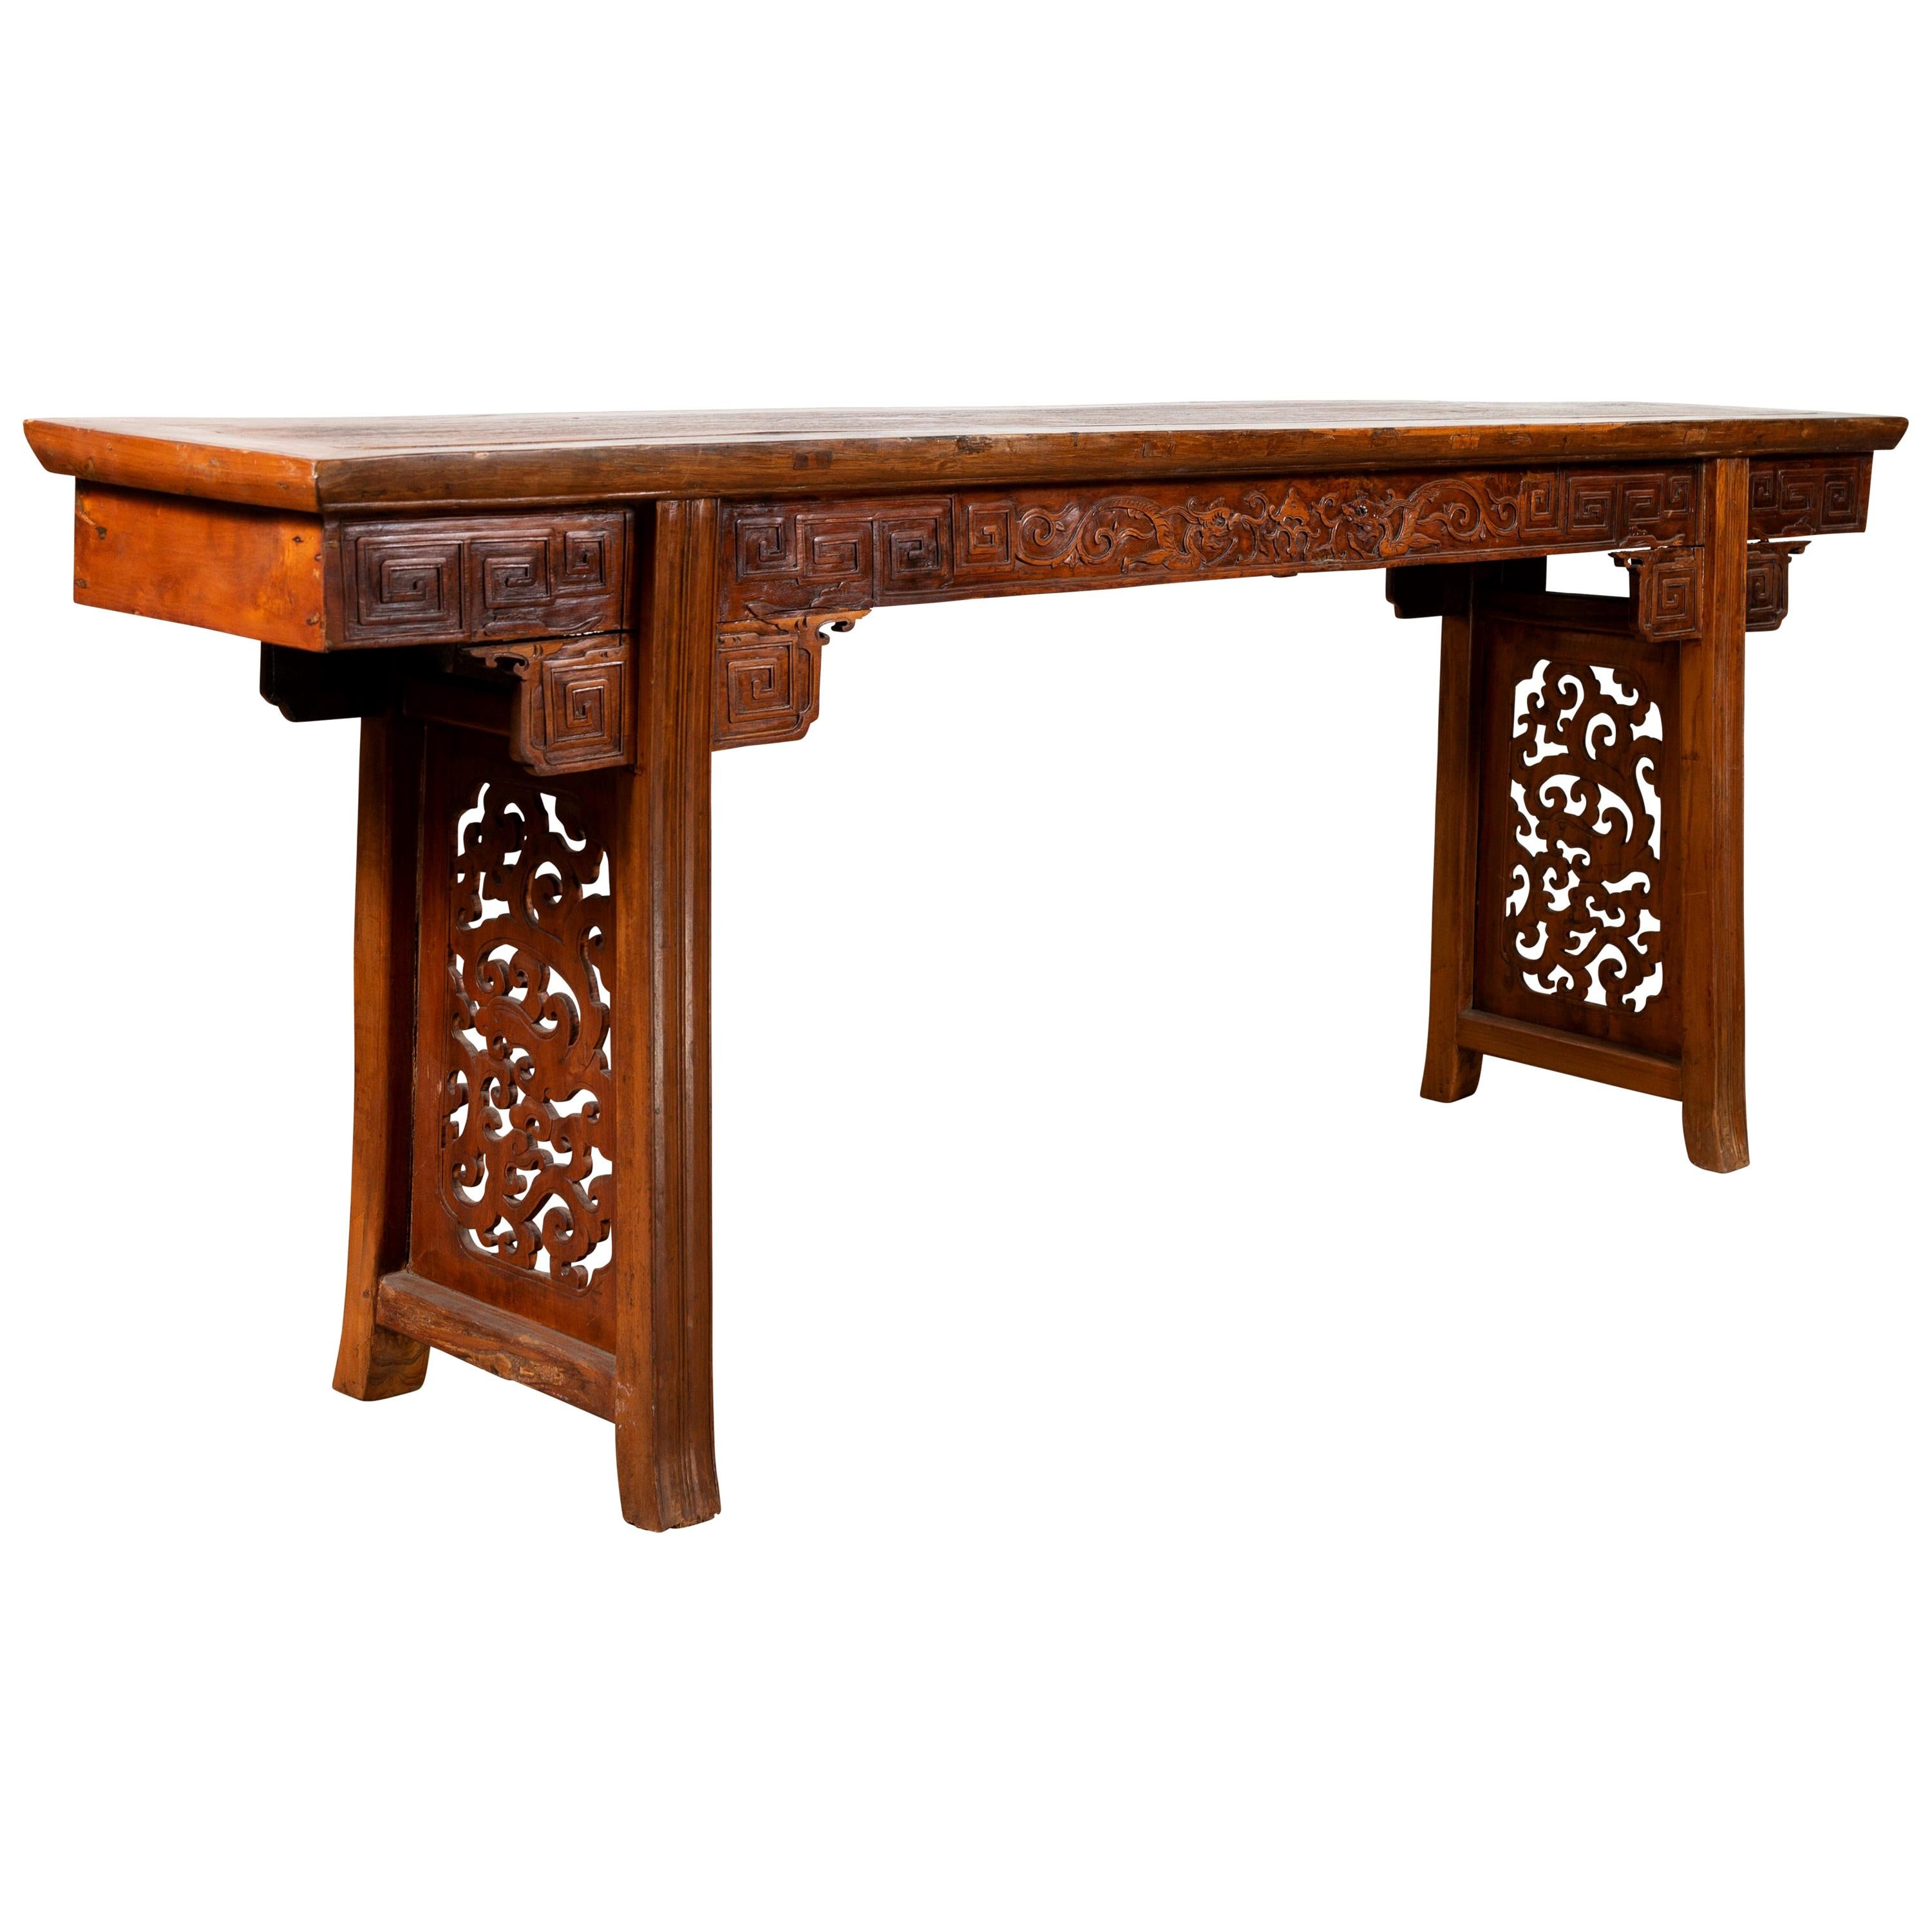 Chinese Antique Tall Altar Console Table with Meander Motifs and Carved Sides